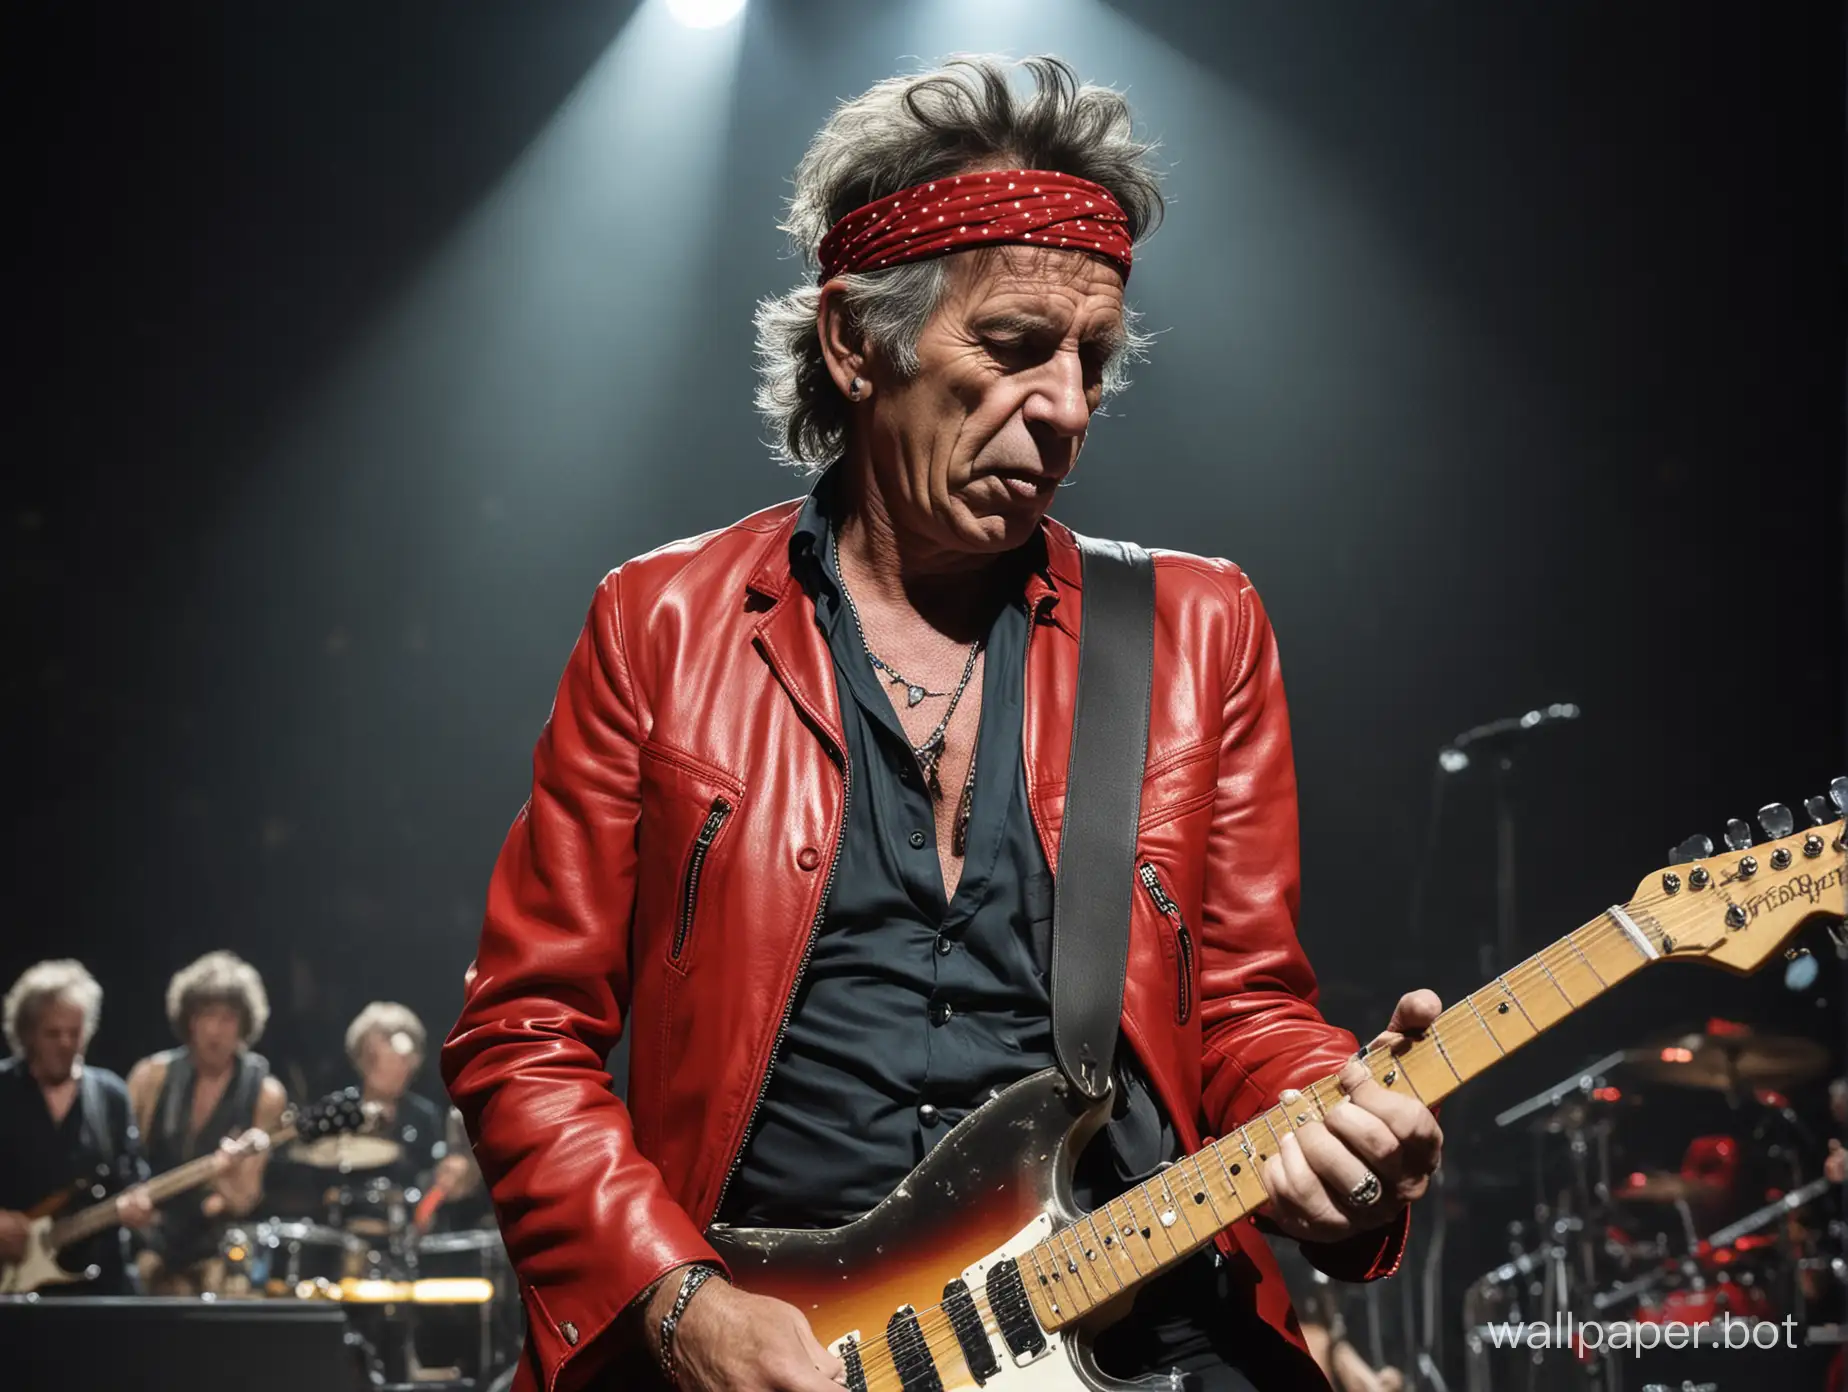 A stunning, high-quality photograph of Keith Richards, the iconic guitarist of the Rolling Stones, playing one of his signature riffs on stage. The spotlights illuminate him as he stands confidently, with a red headband adorning his forehead, unruly hair, deep wrinkles, The enthusiastic crowd can be seen in the foreground, their heads bobbing in unison, creating a sea of motion. The colourful backdrop adds to the vibrant atmosphere, while Keith's sharp, detailed features showcase his passion for the music. The realistic image captures the essence of a legendary rock concert., photo